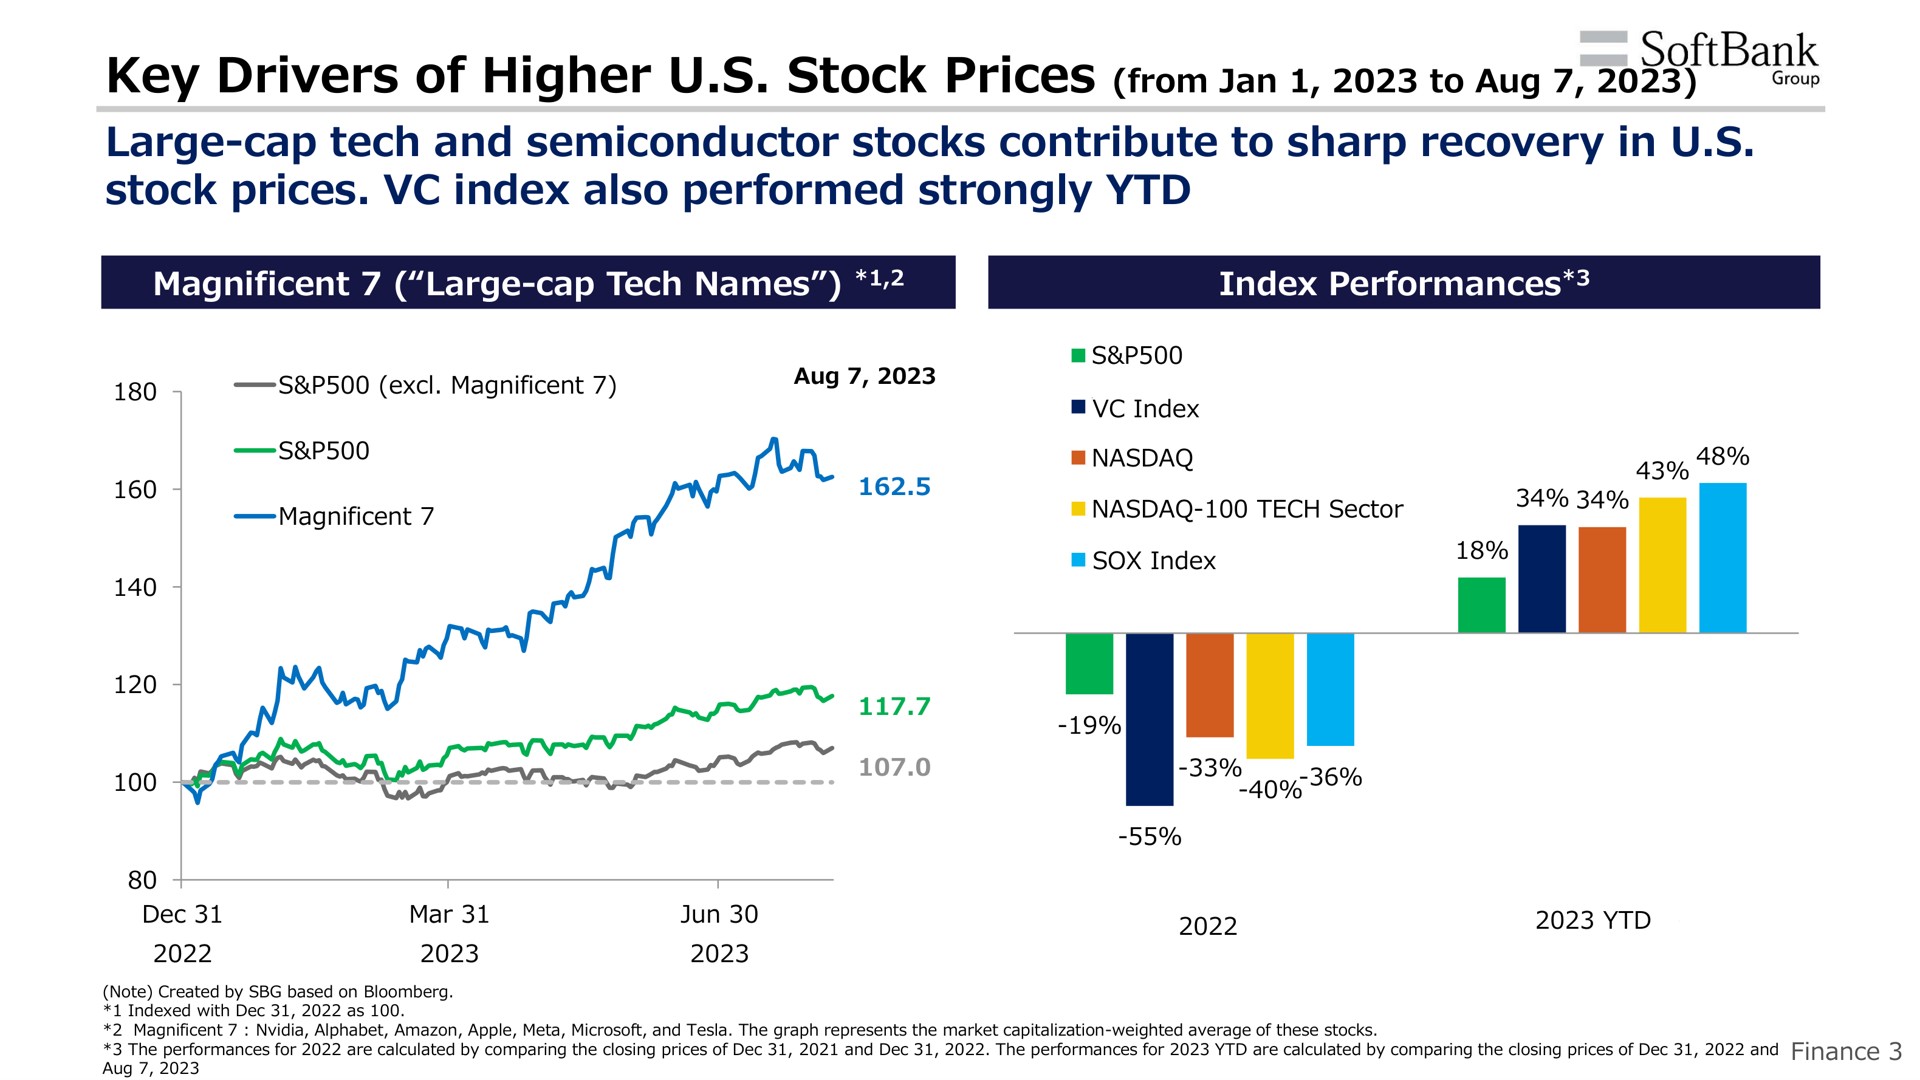 key drivers of higher stock prices from to large cap tech and semiconductor stocks contribute to sharp recovery in stock prices index also performed strongly | SoftBank